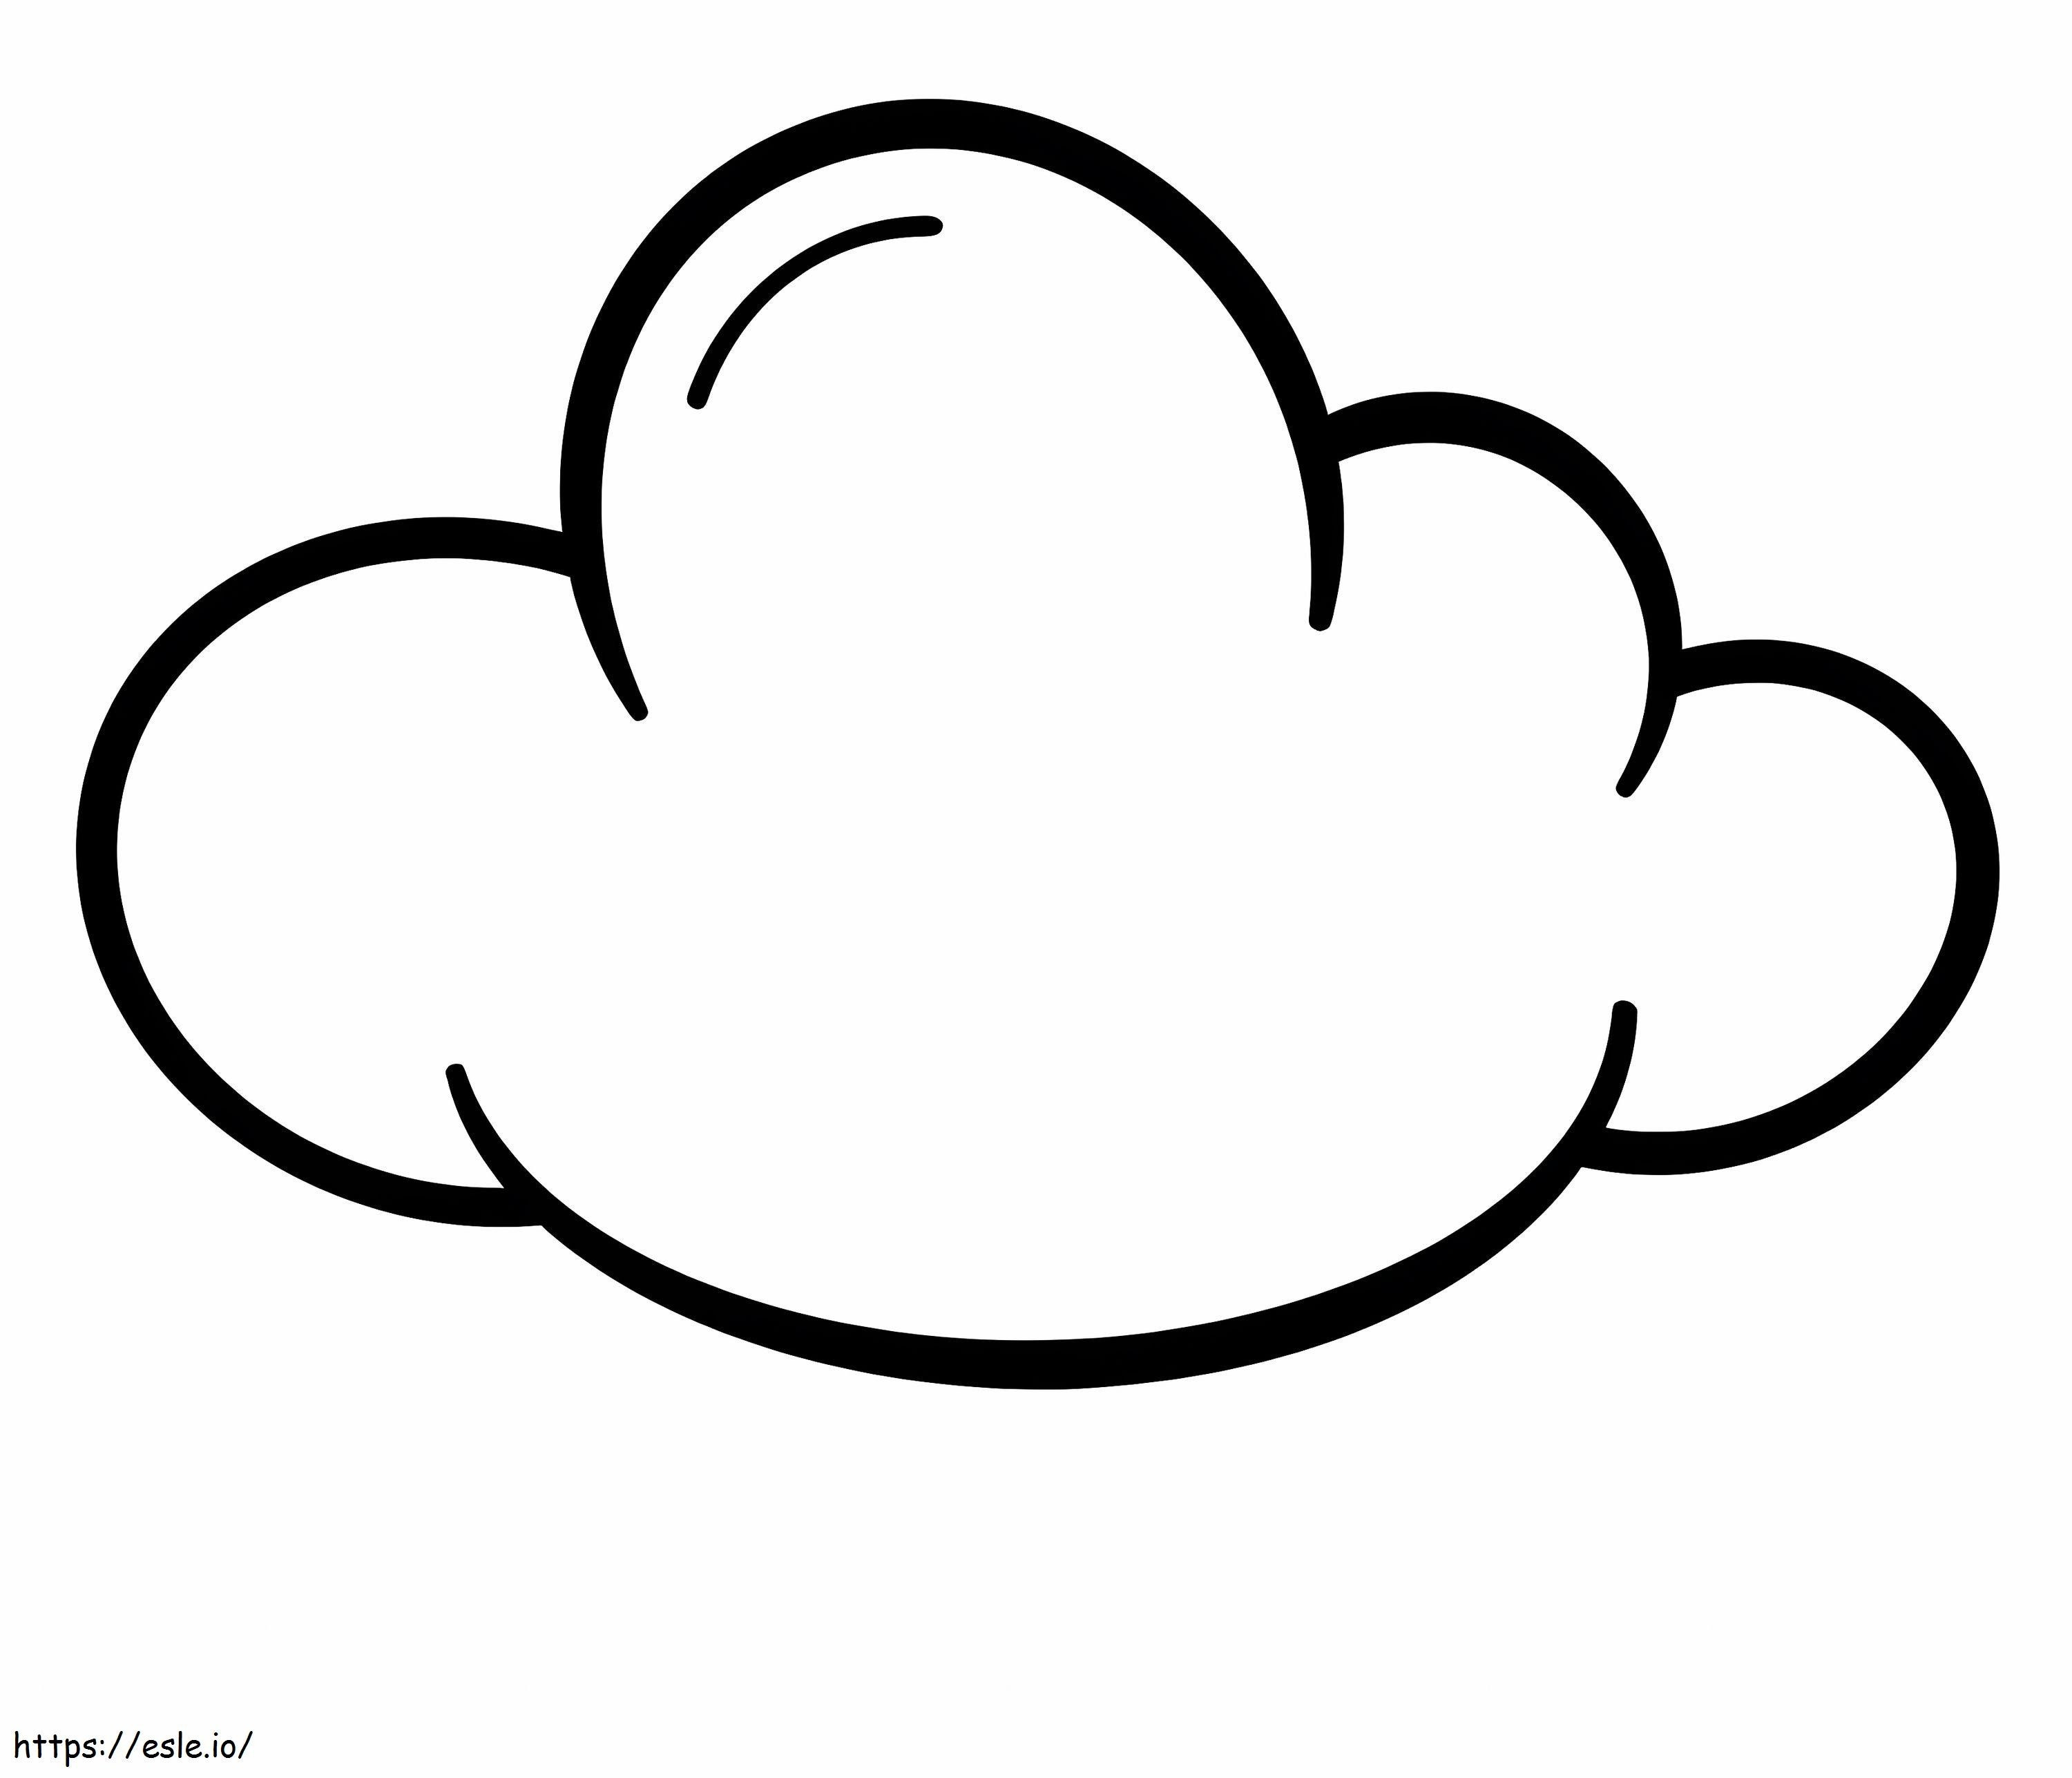 Awesome Cloud coloring page